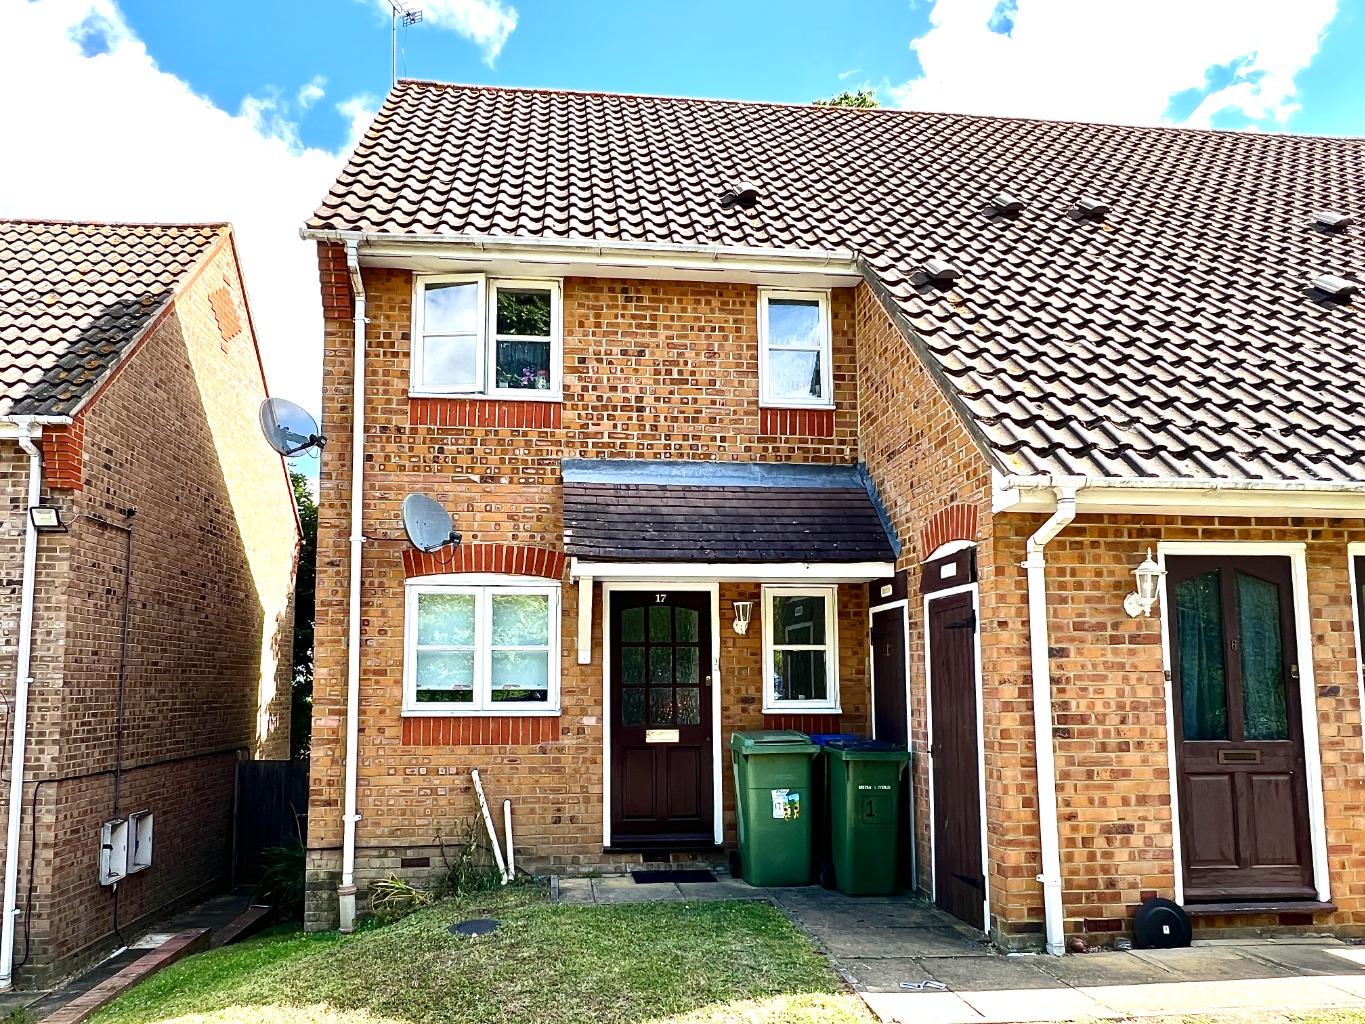 Beaumont Gibbs are delighted to offer this modern and  unfurnished one bedroomed ground floor maisonette to let.  Situated in a cul-de-sac location, the property is very nicely presented internally, with a modern fitted kitchen, which comes with a washing machine, fridge/freezer and an electric oven